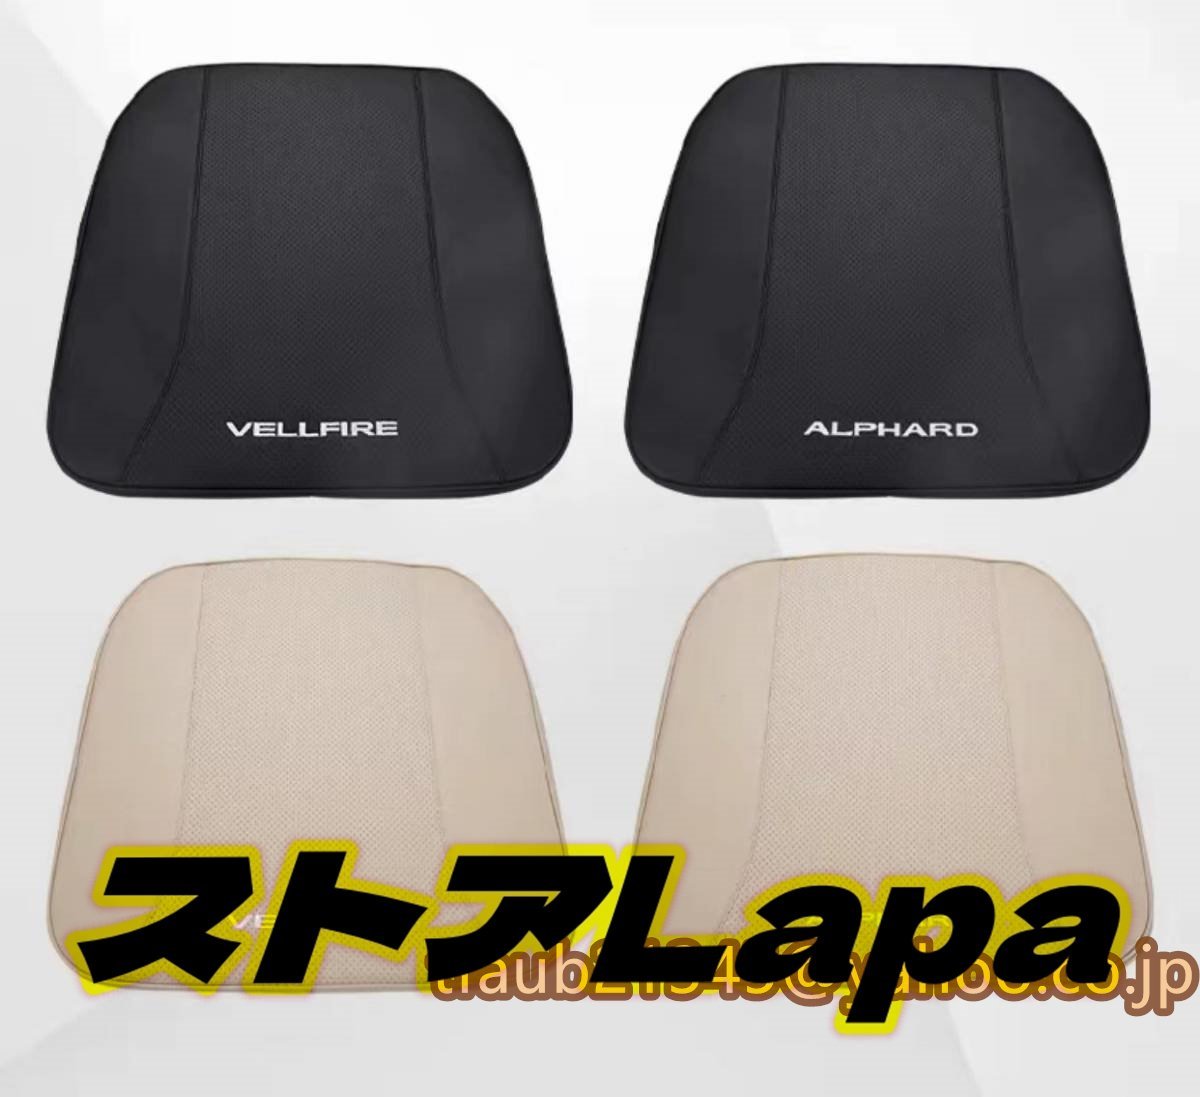 alphard/vellfire30 series seat cushion set leather car stylish thickness . waterproof interior goods accessory recommendation beige 